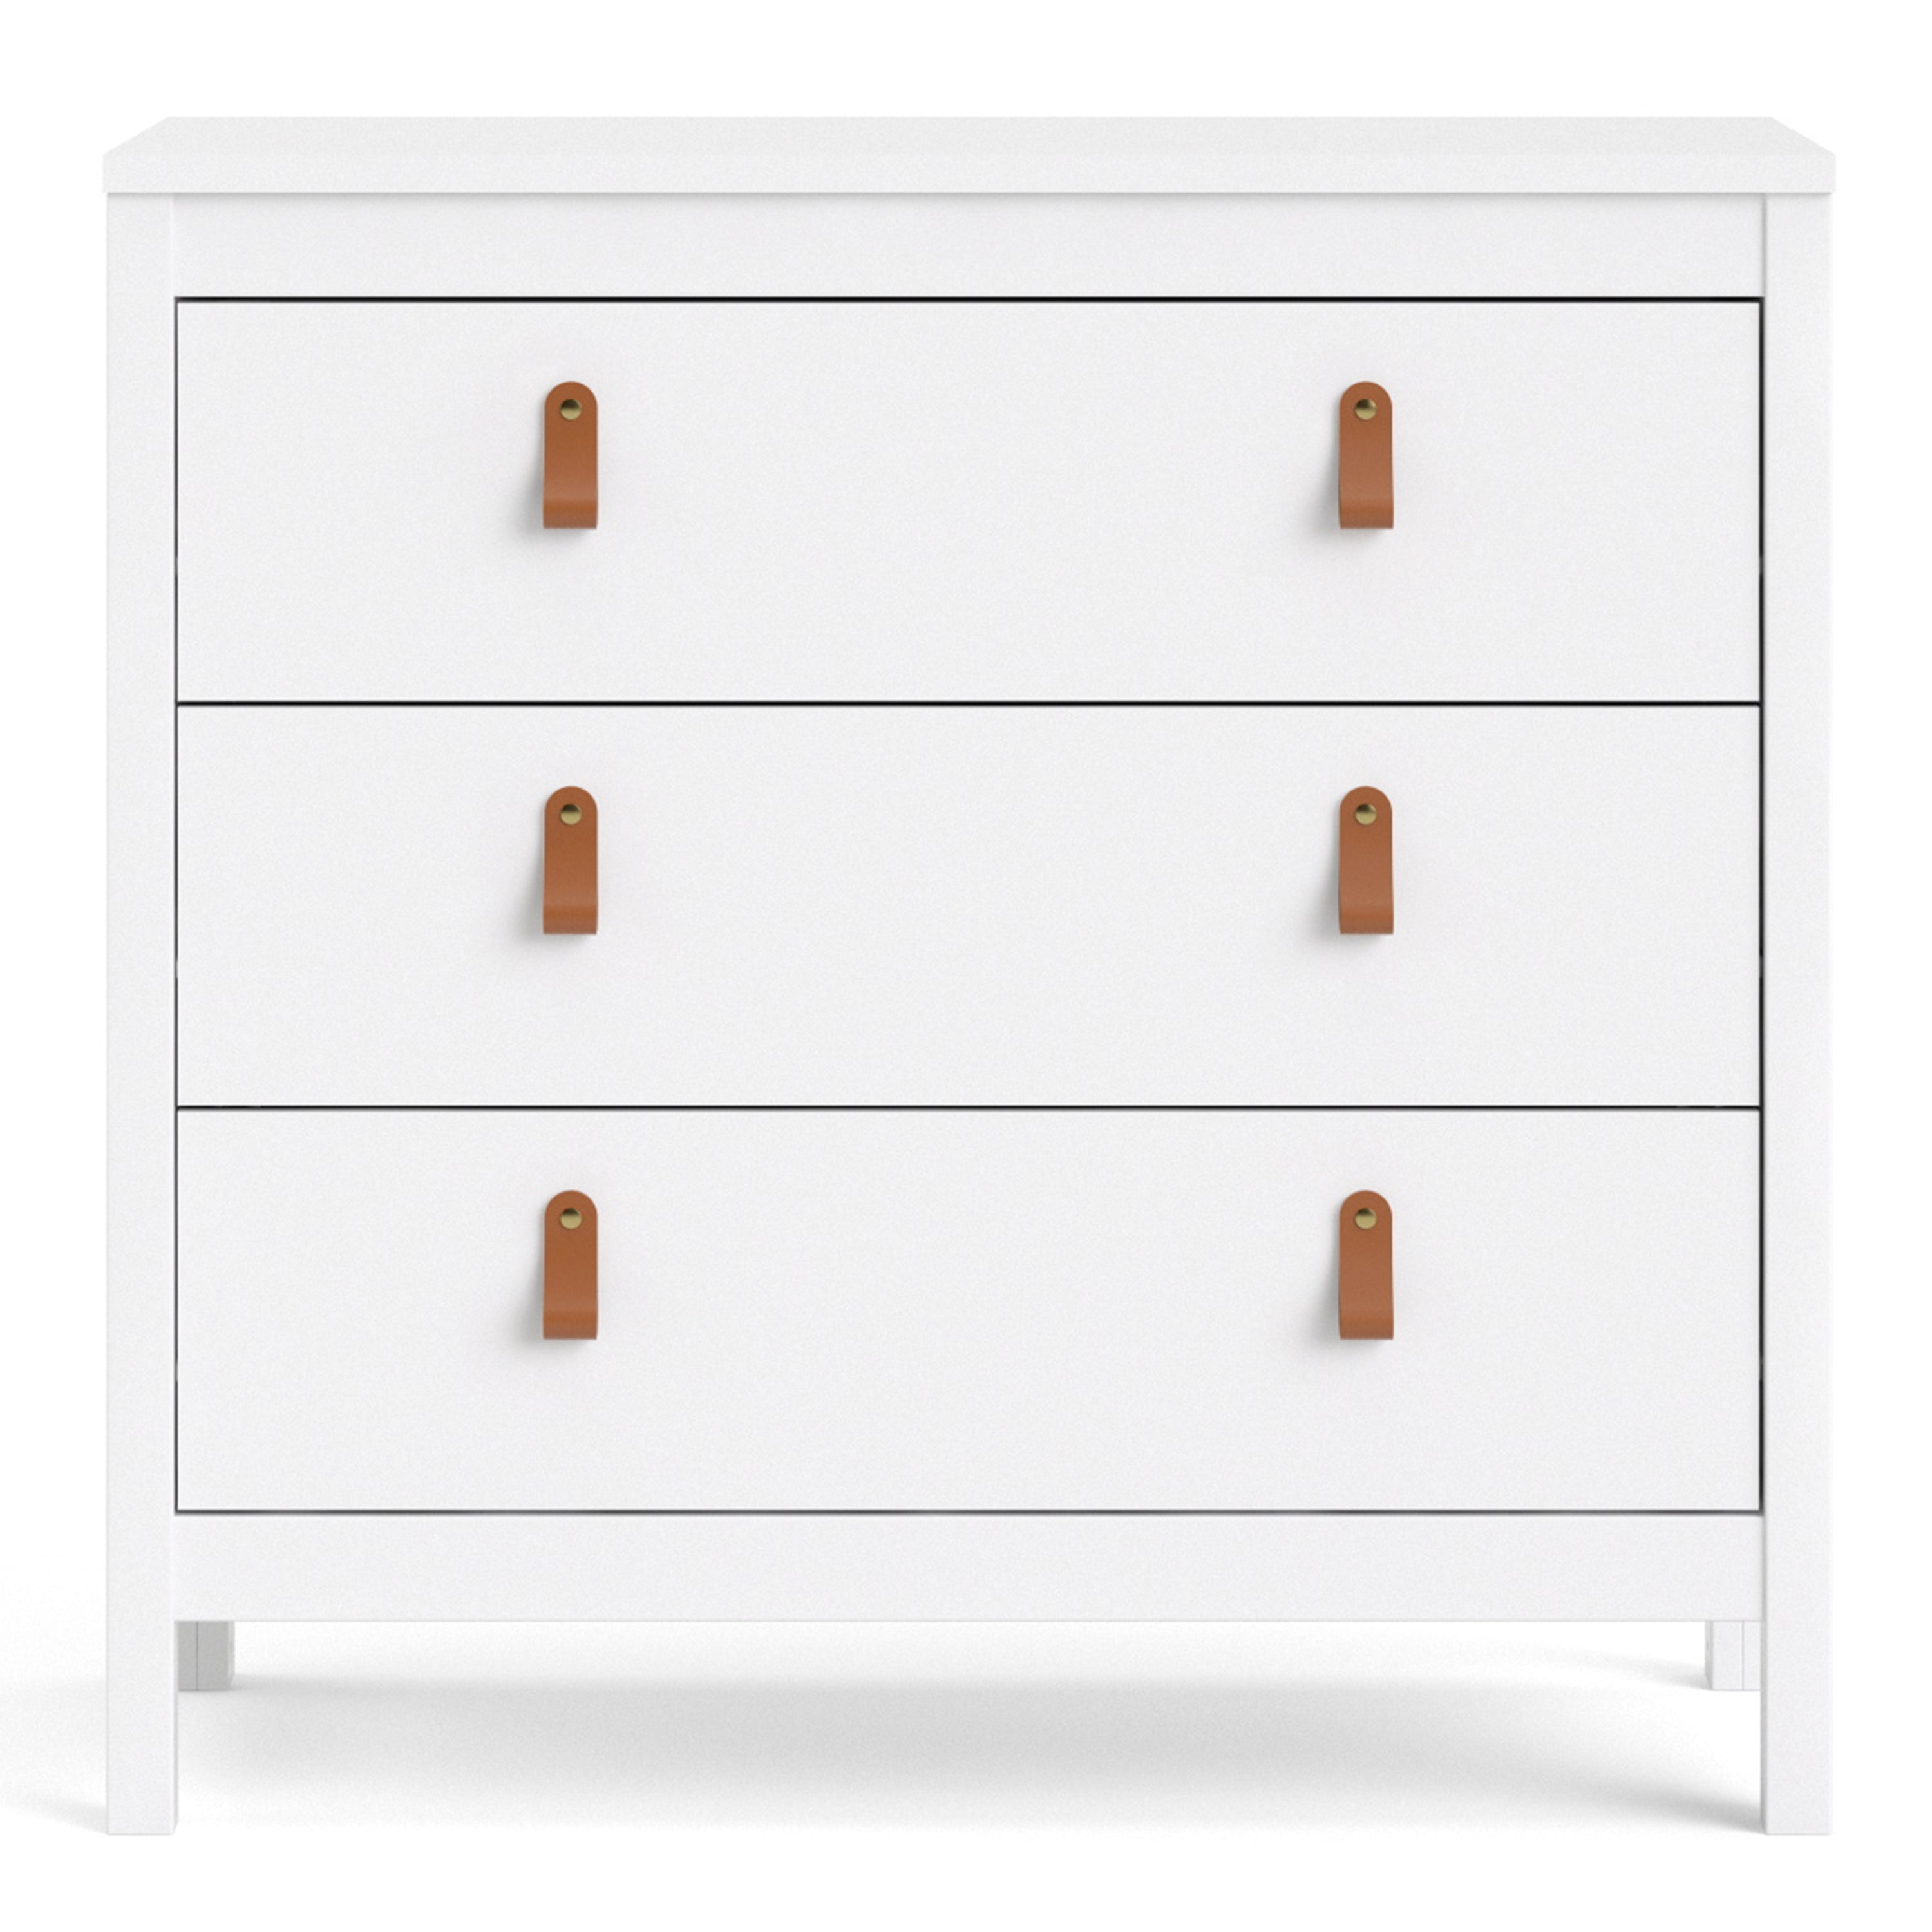 Barcelona Chest 3 Drawers in White Furniture To Go Ltd